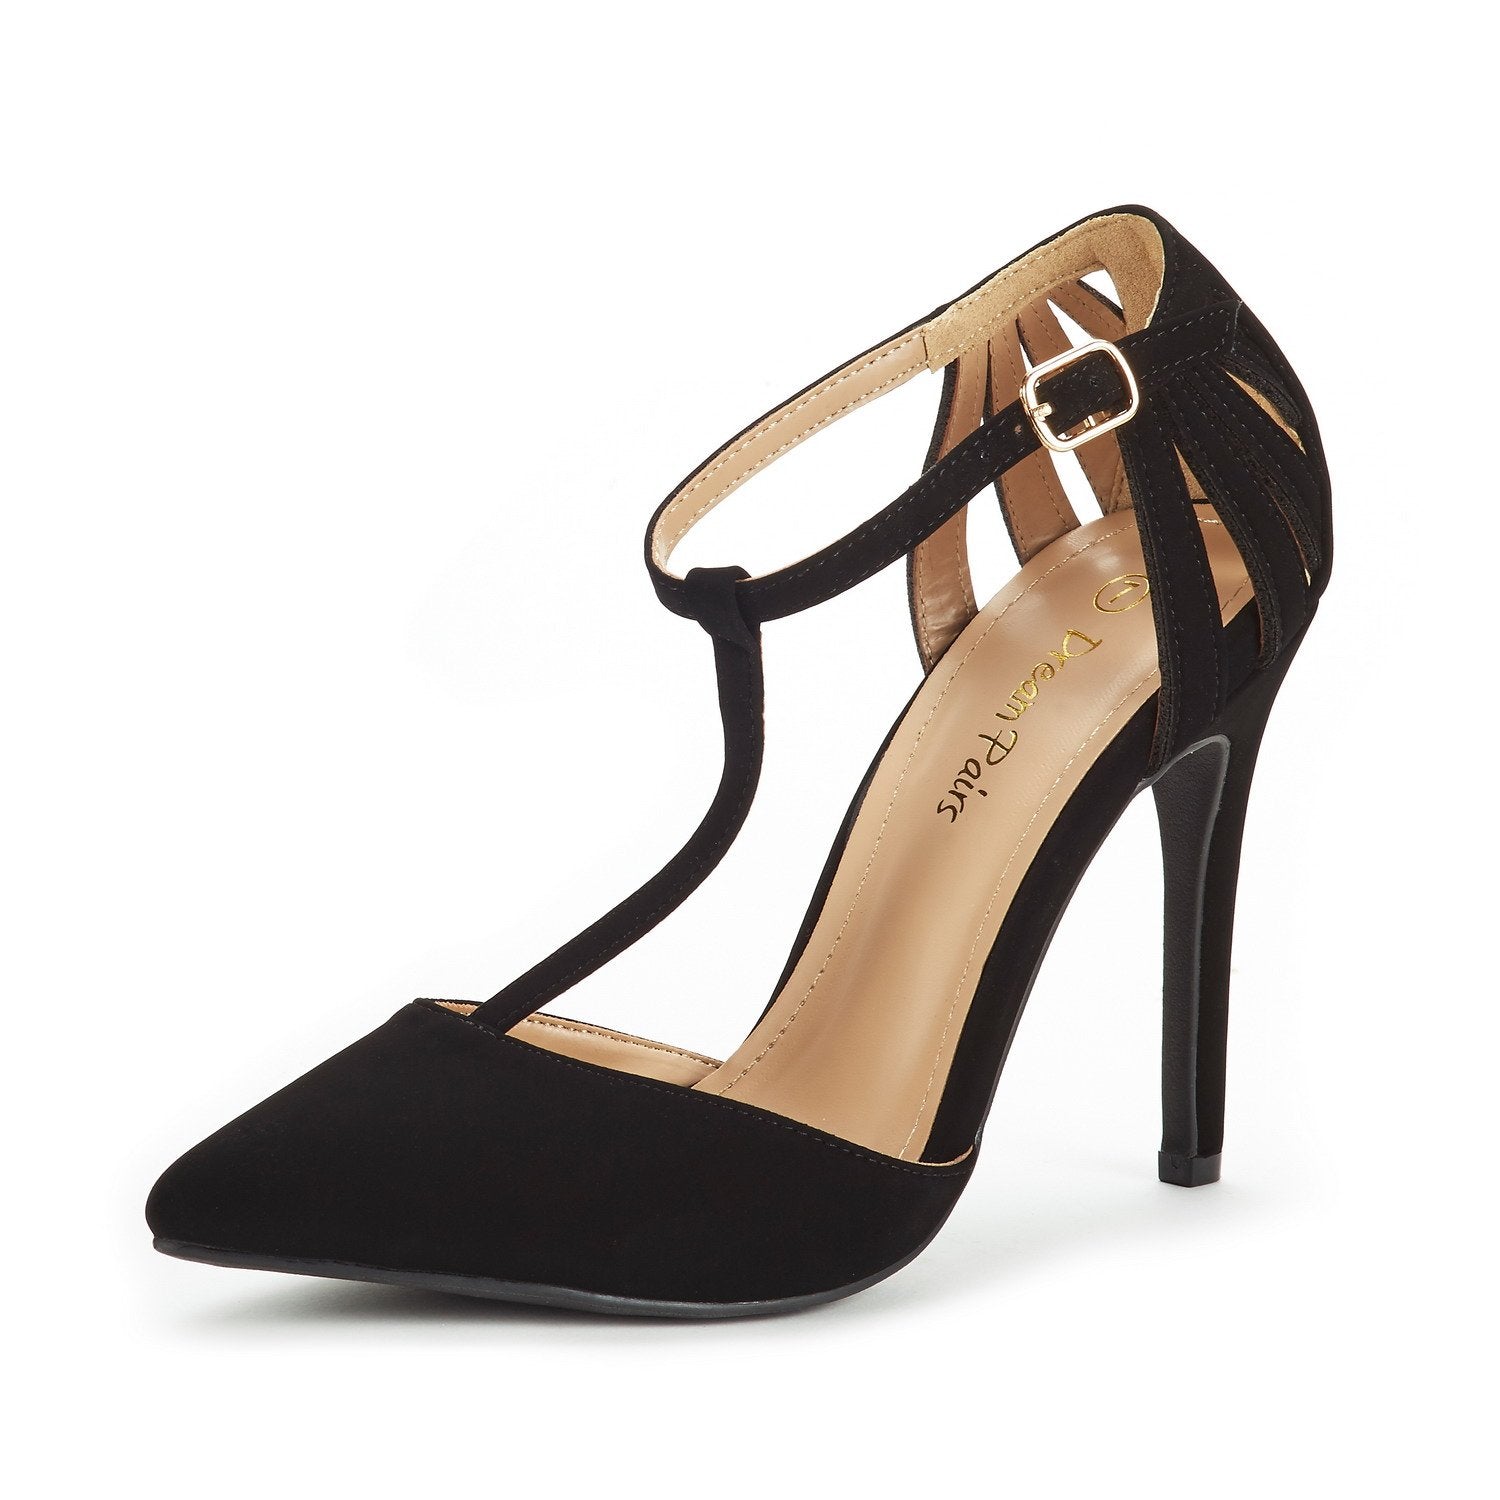 Women's High Heel Pump Shoes | Strappy Pumps-Dream Pairs